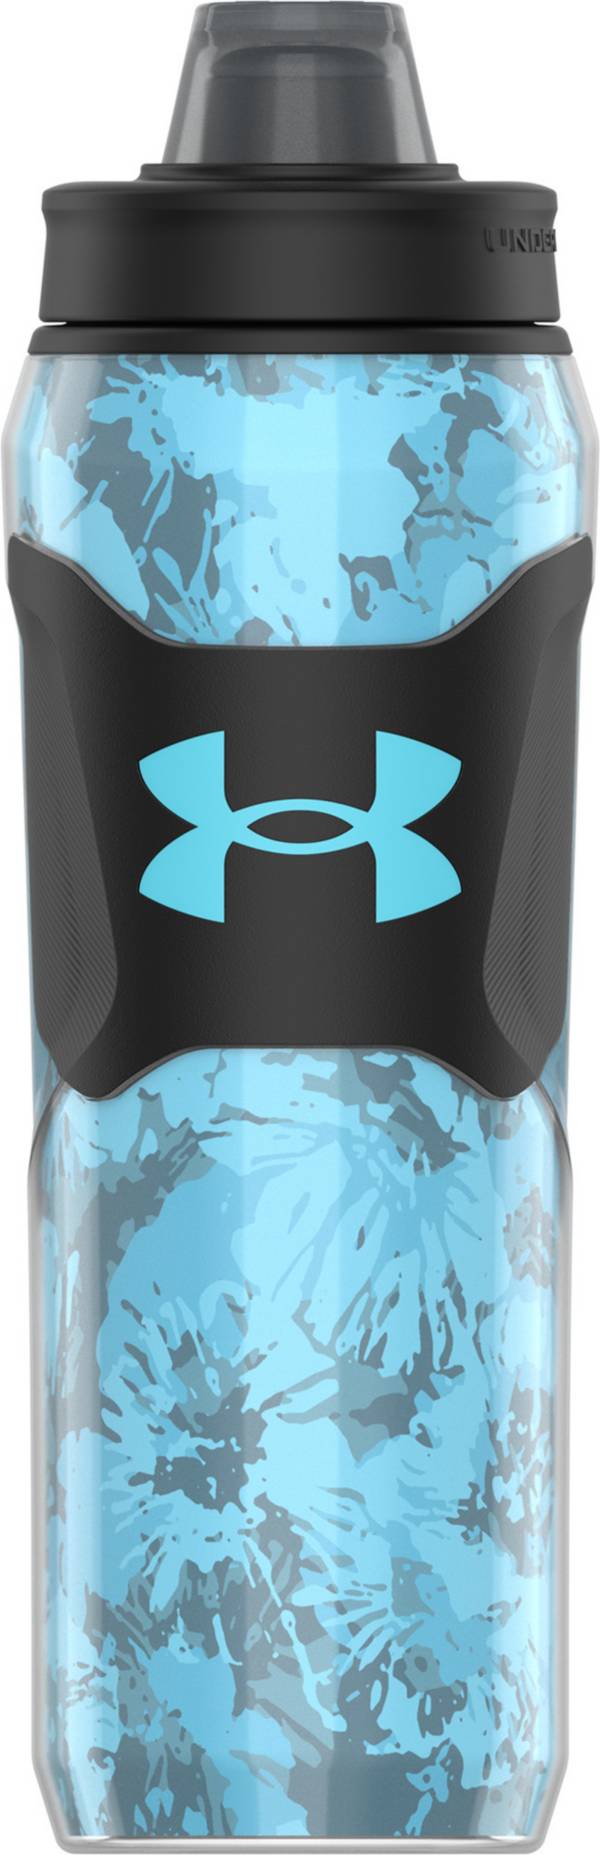 Under Armour Playmaker Insulated 28 Water Bottle | Dick's Sporting Goods